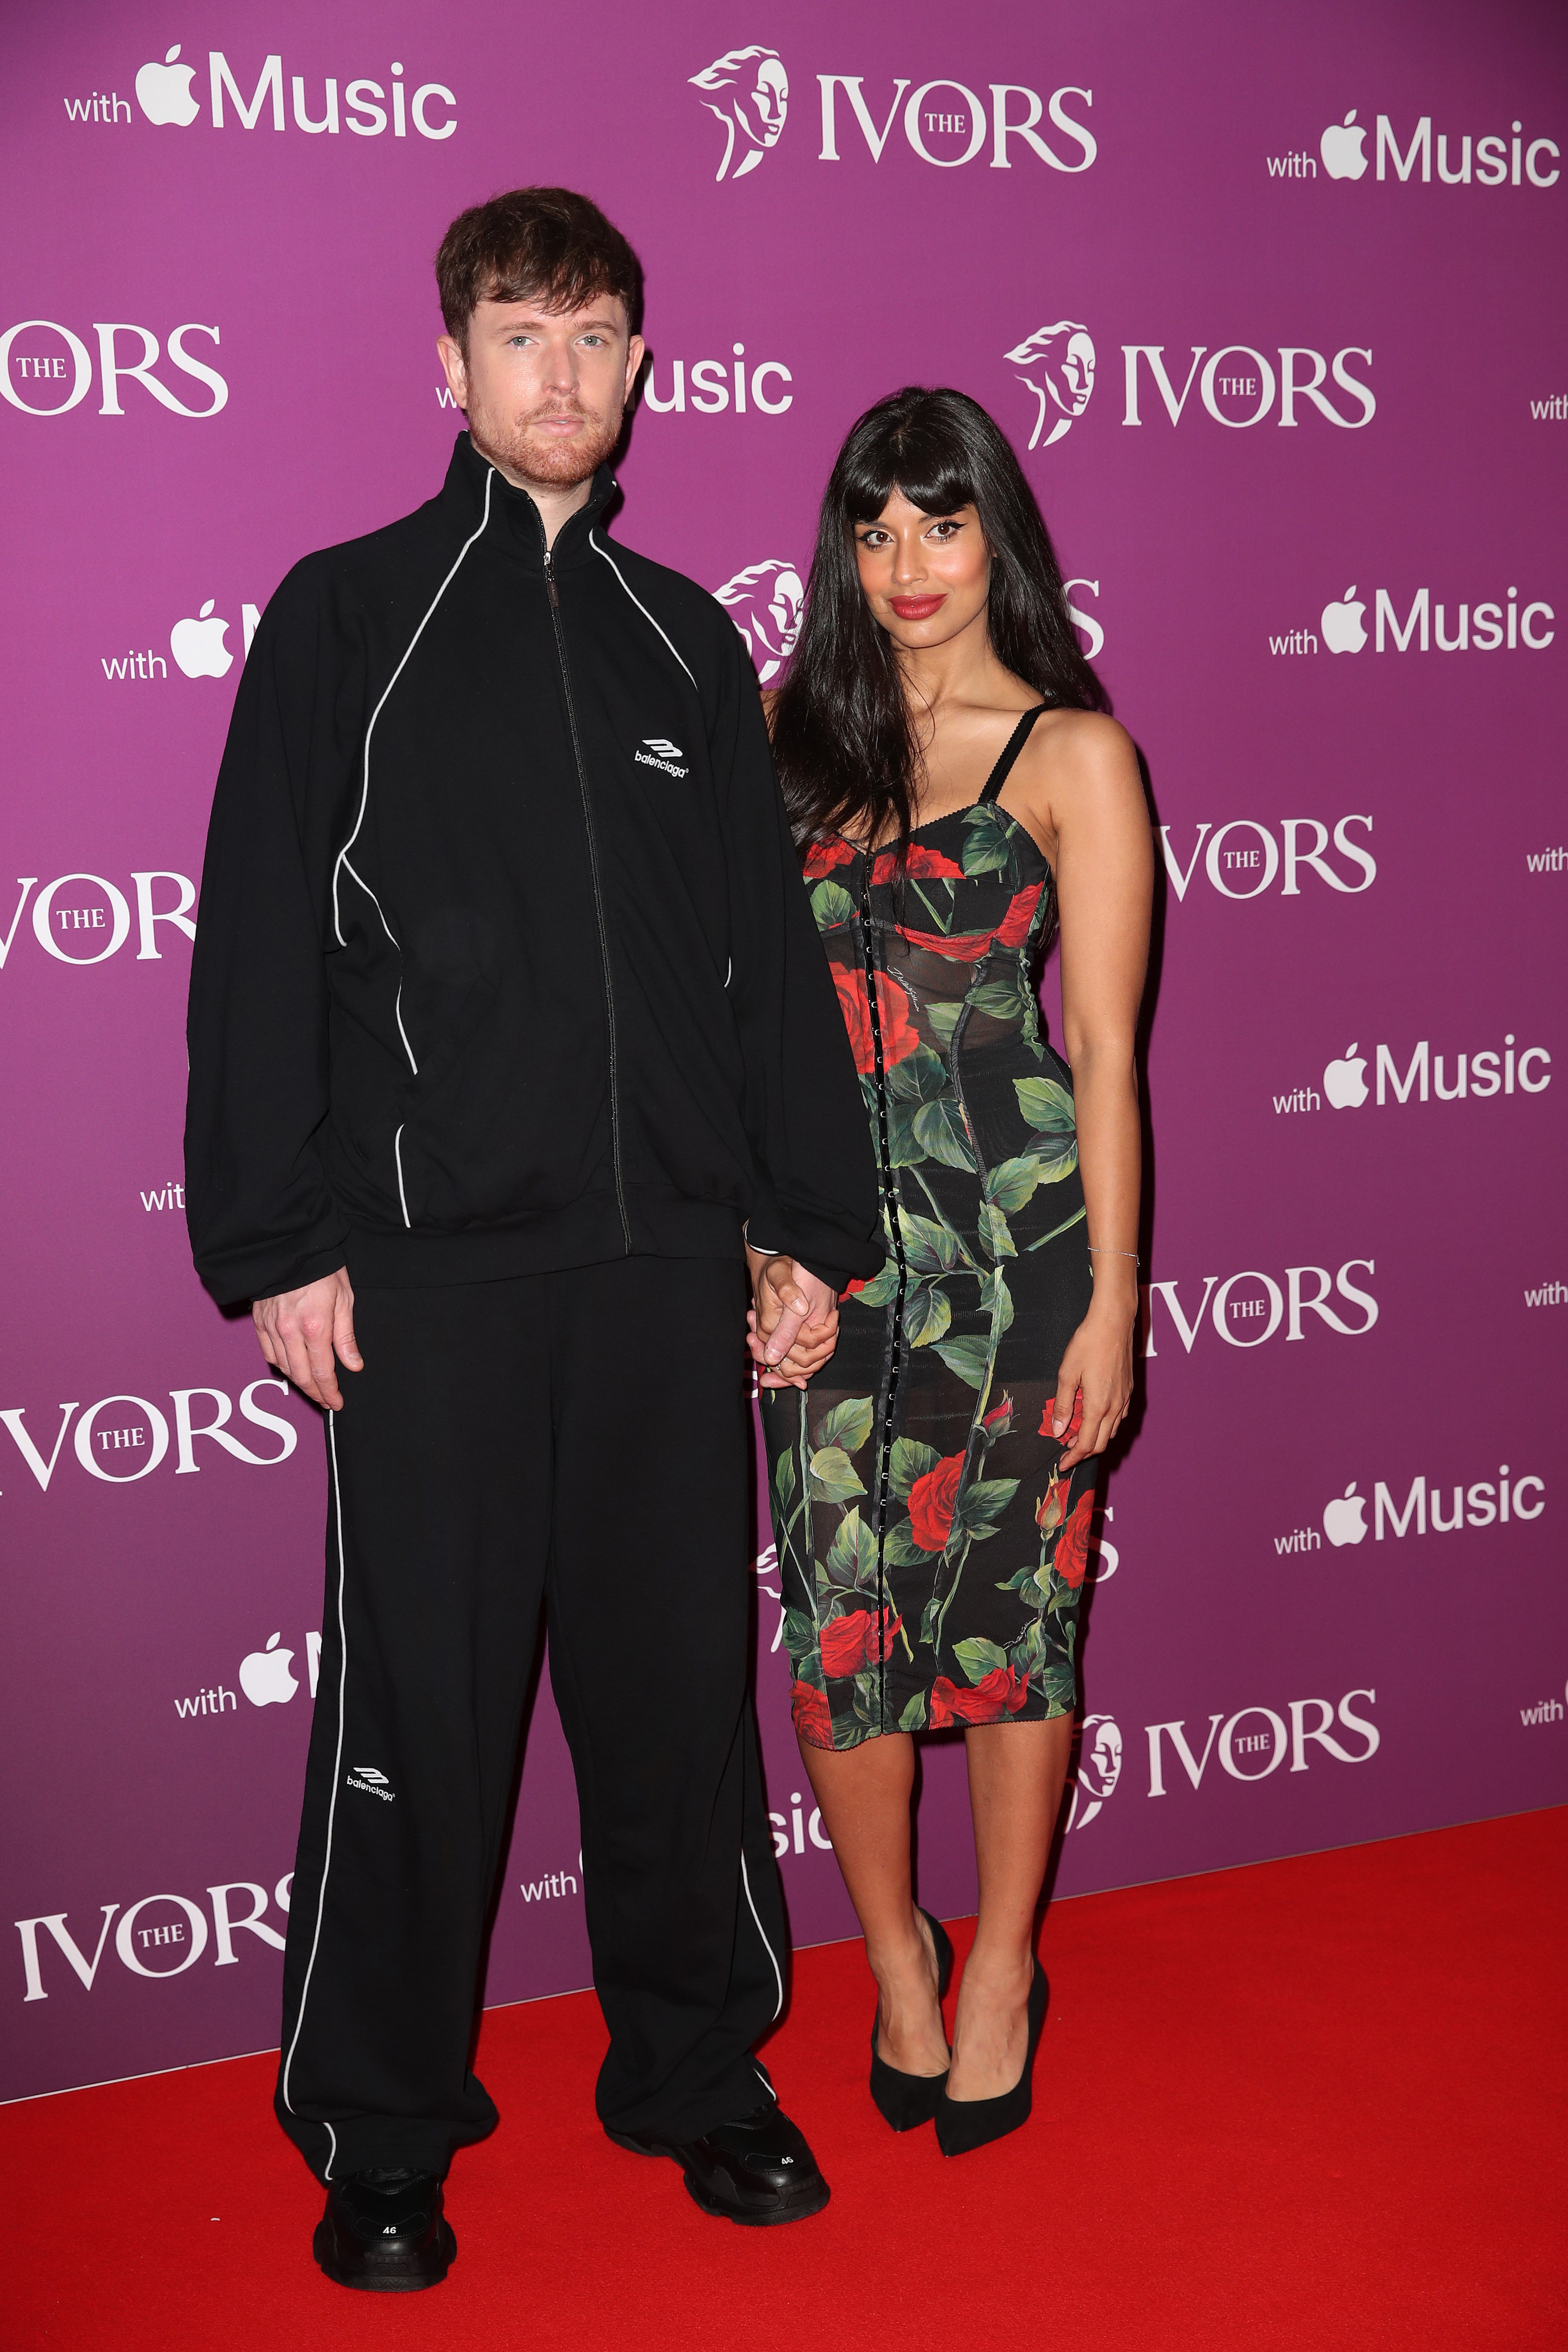 James Blake and Jamila Jameel on the red carpet holding hands